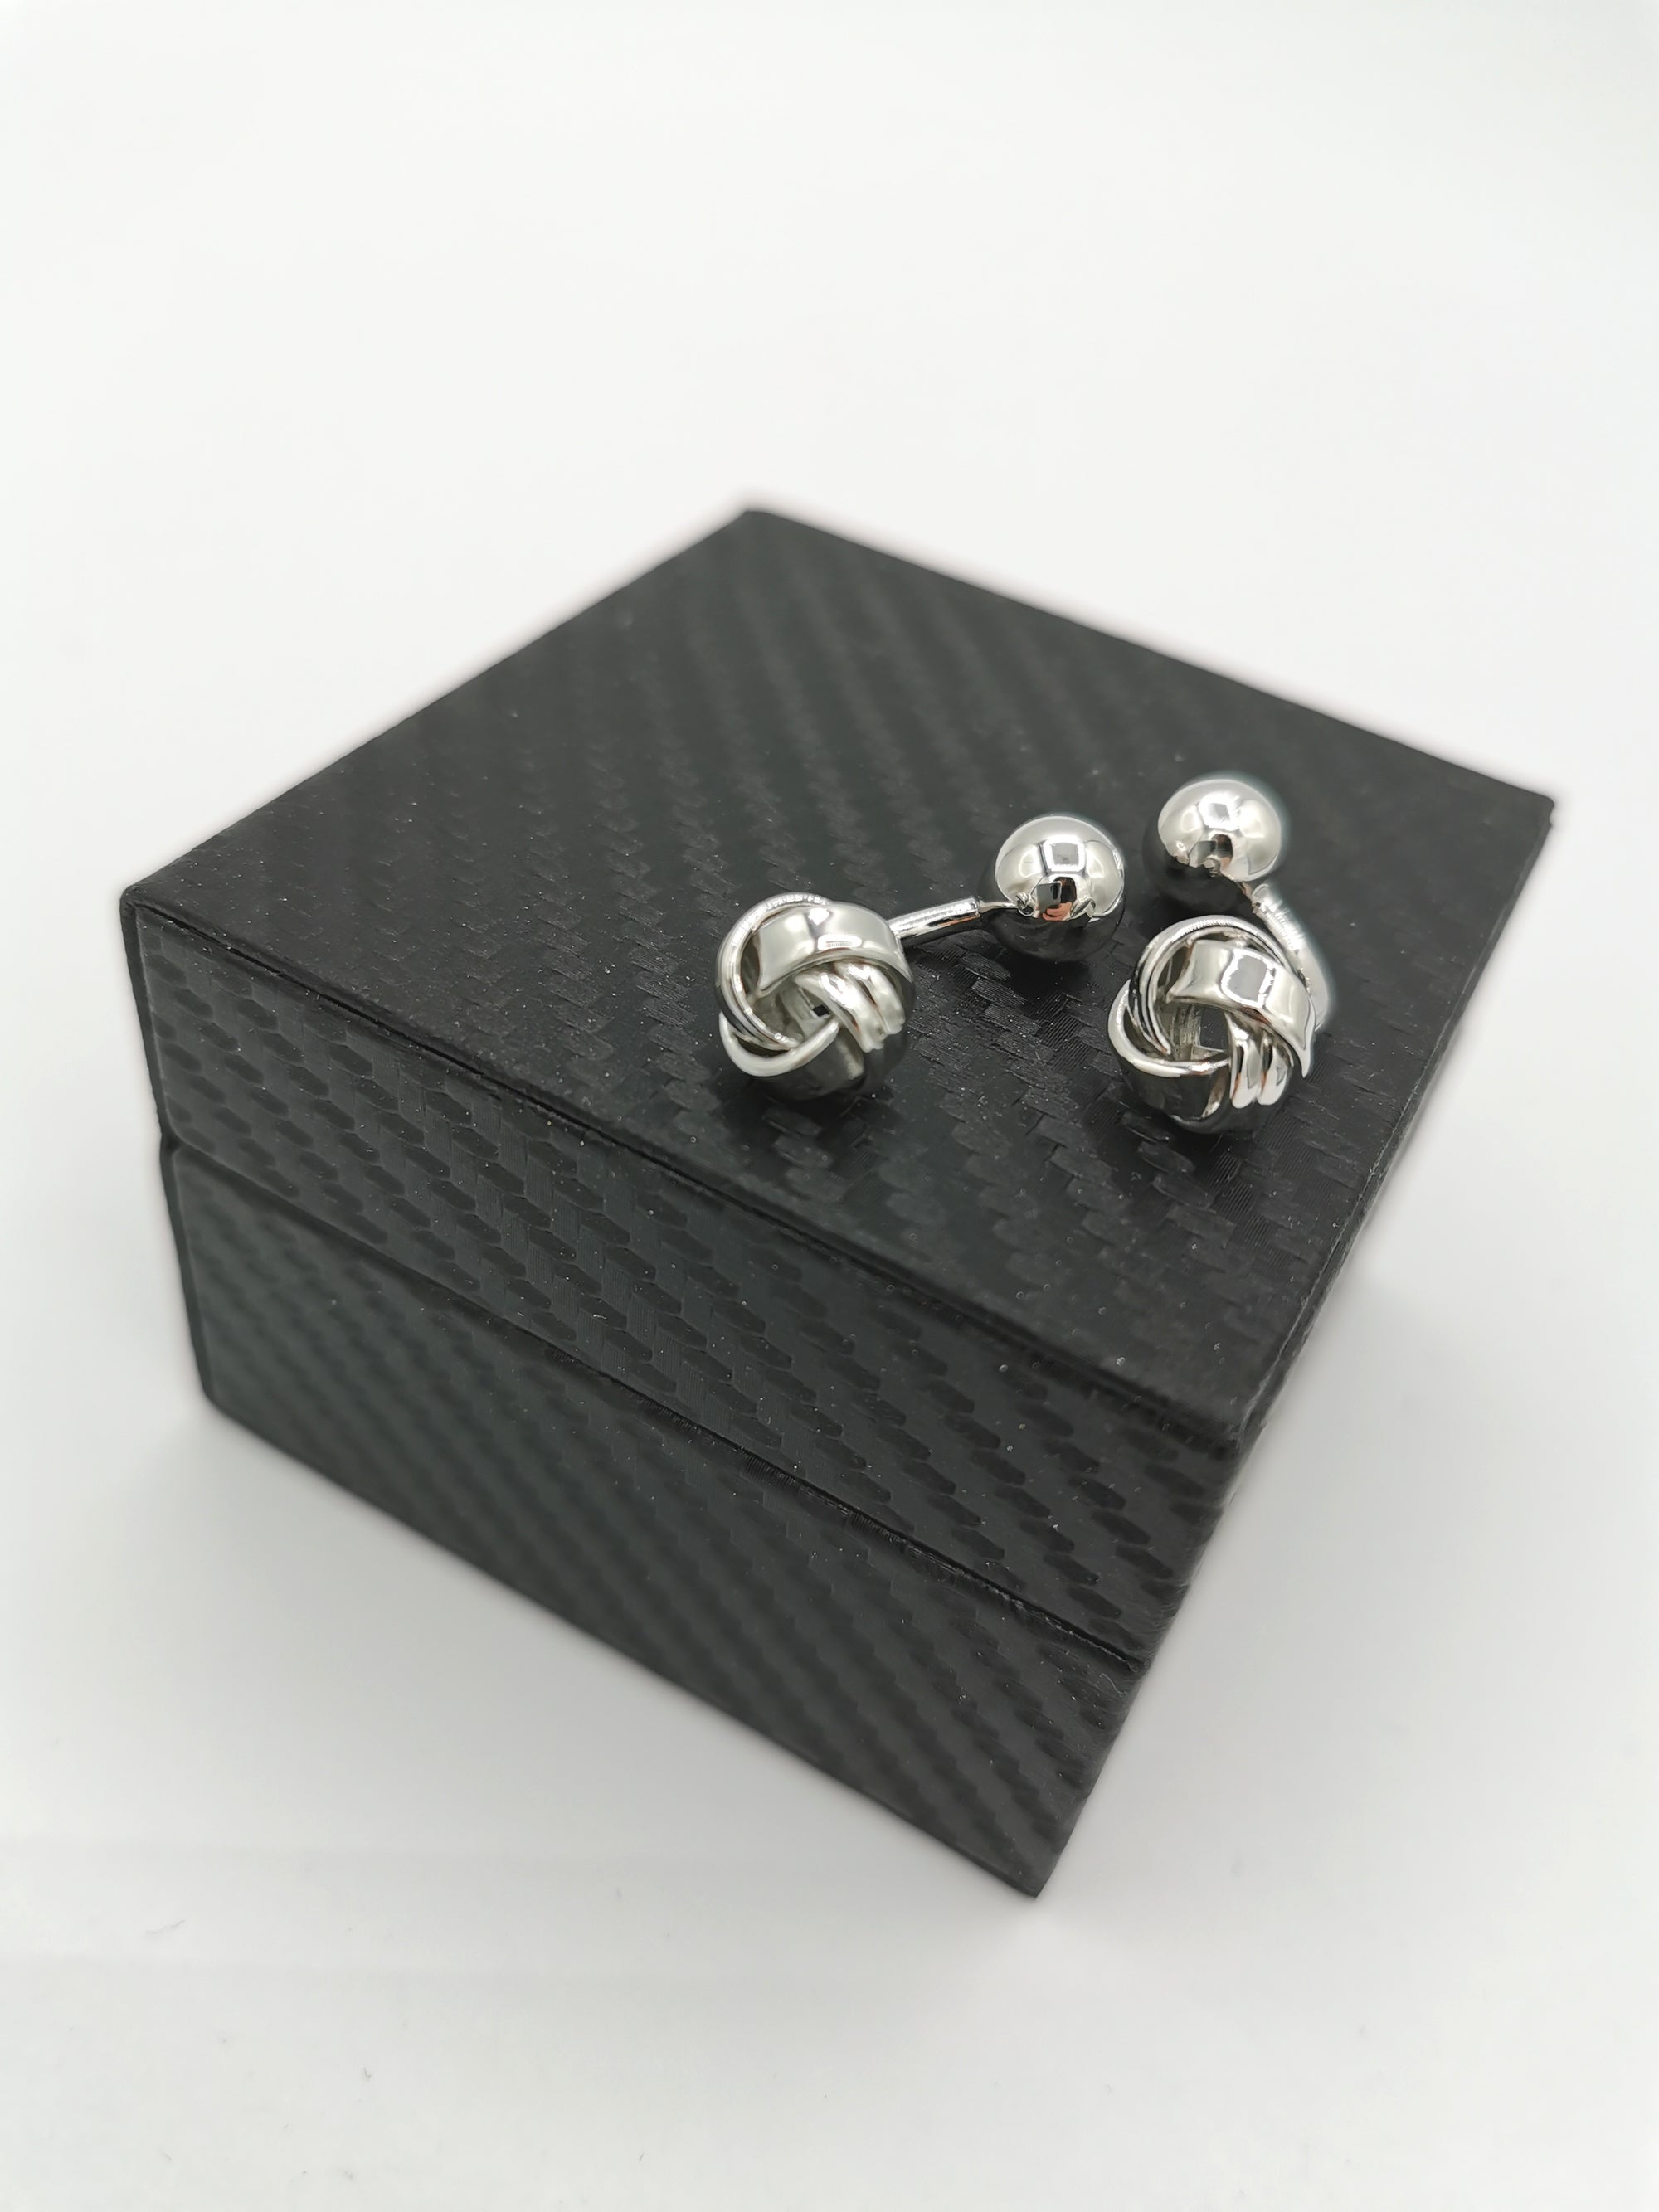 SILVER KNOT AND BALL CUFFLINKS